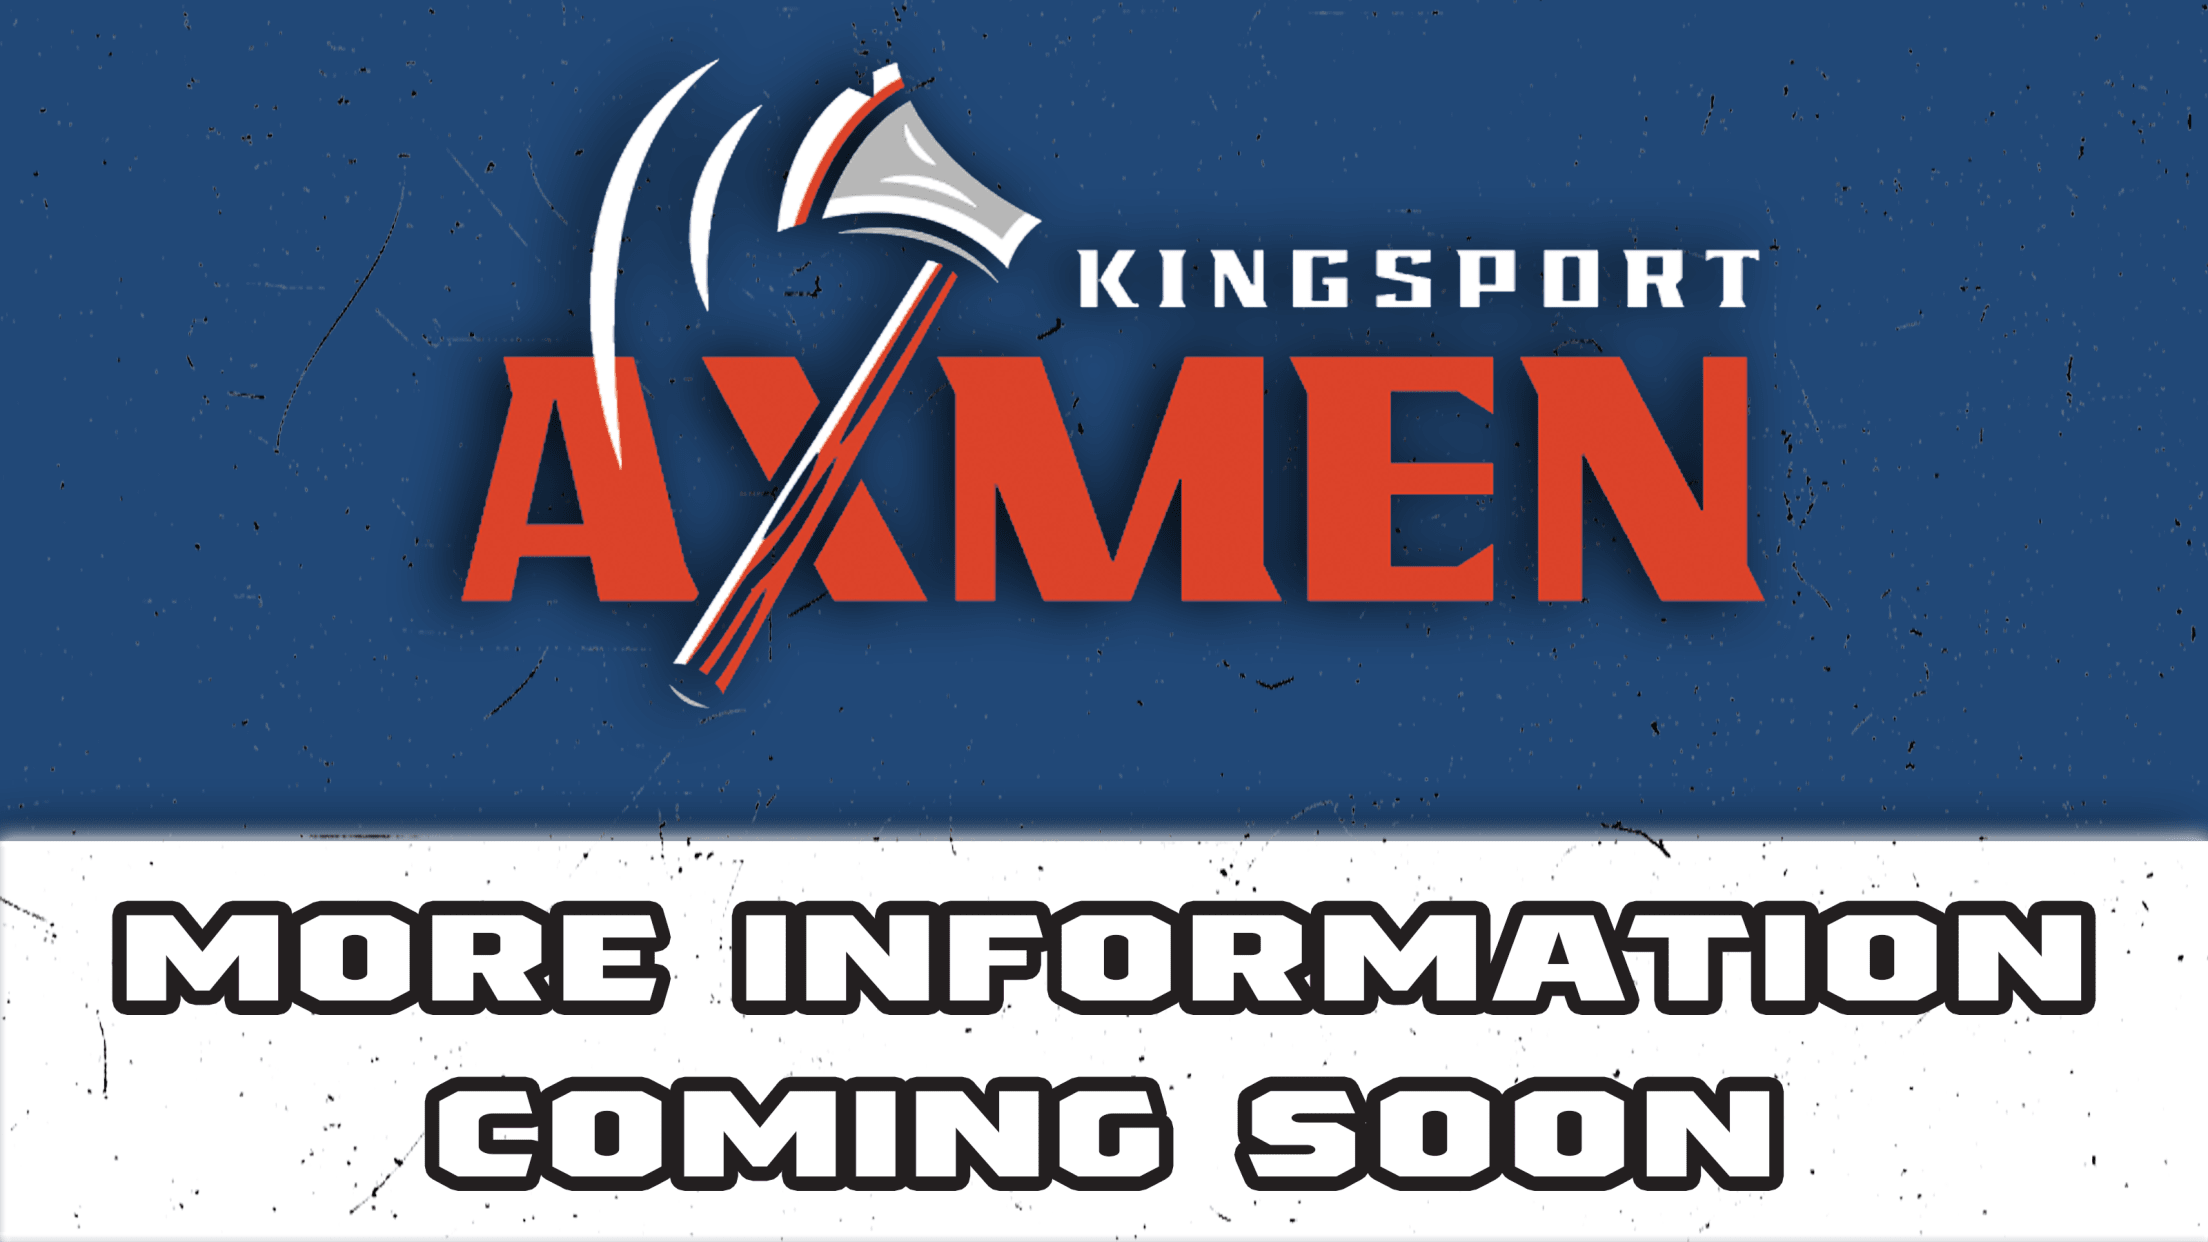 Kingsport Axmen announce 2021 promotional schedule